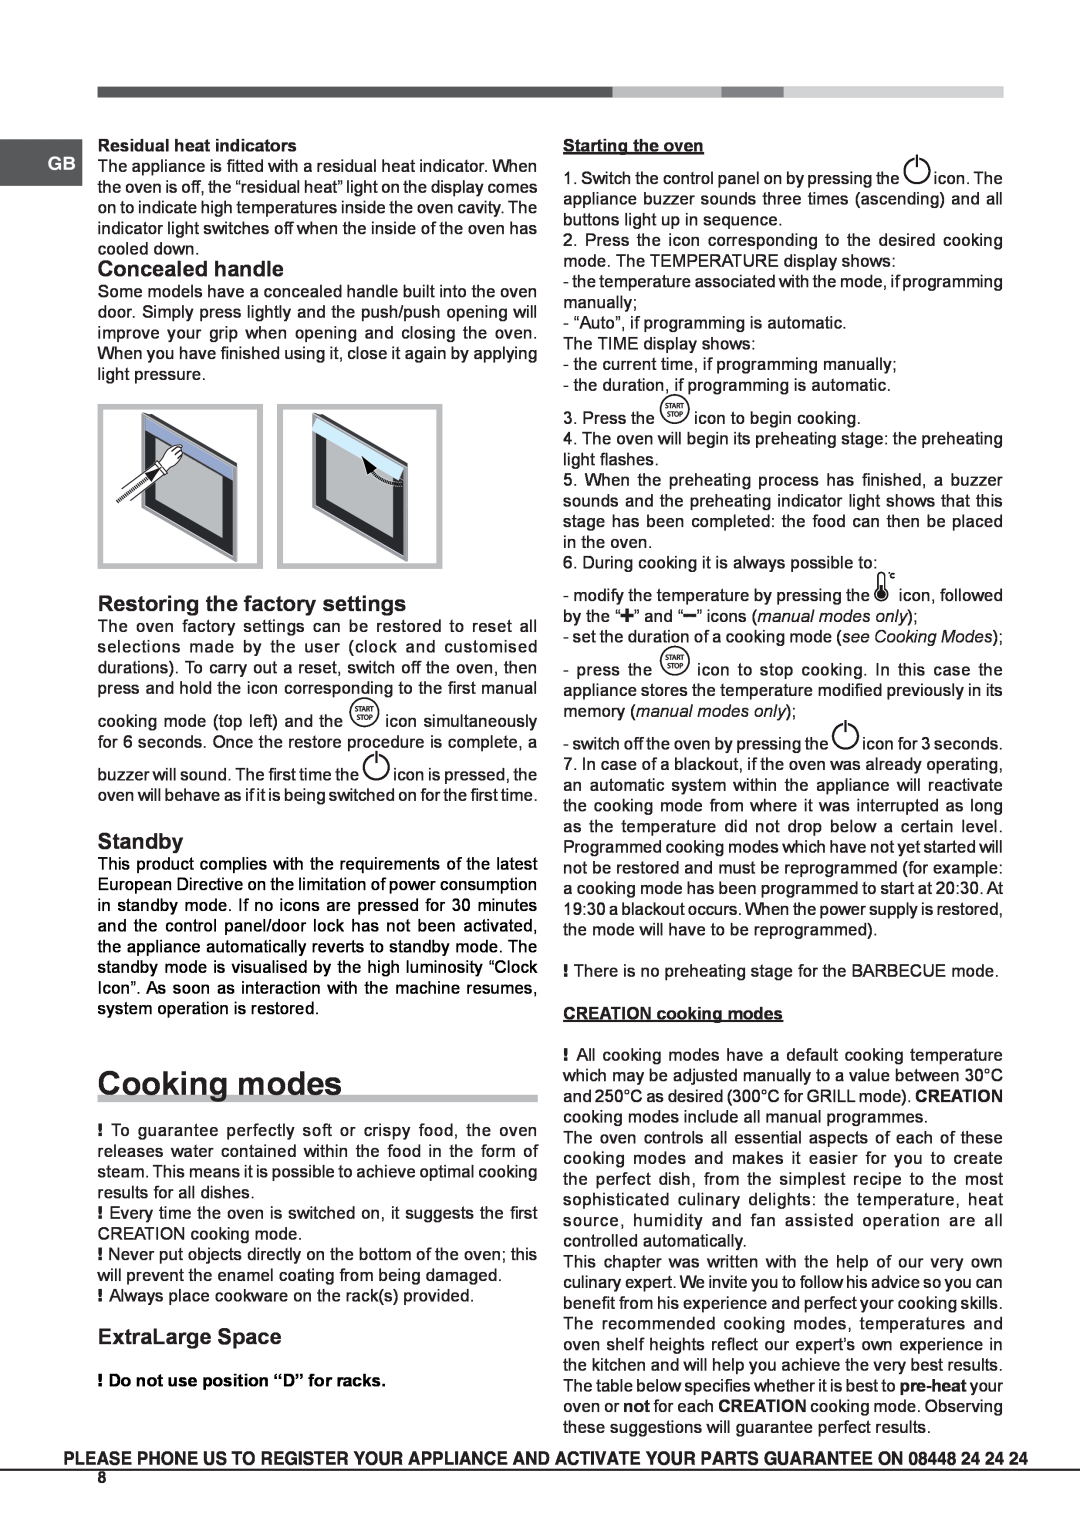 Hotpoint osx 1036n dcx s manual Cooking modes, Concealed handle, Restoring the factory settings, Standby, ExtraLarge Space 